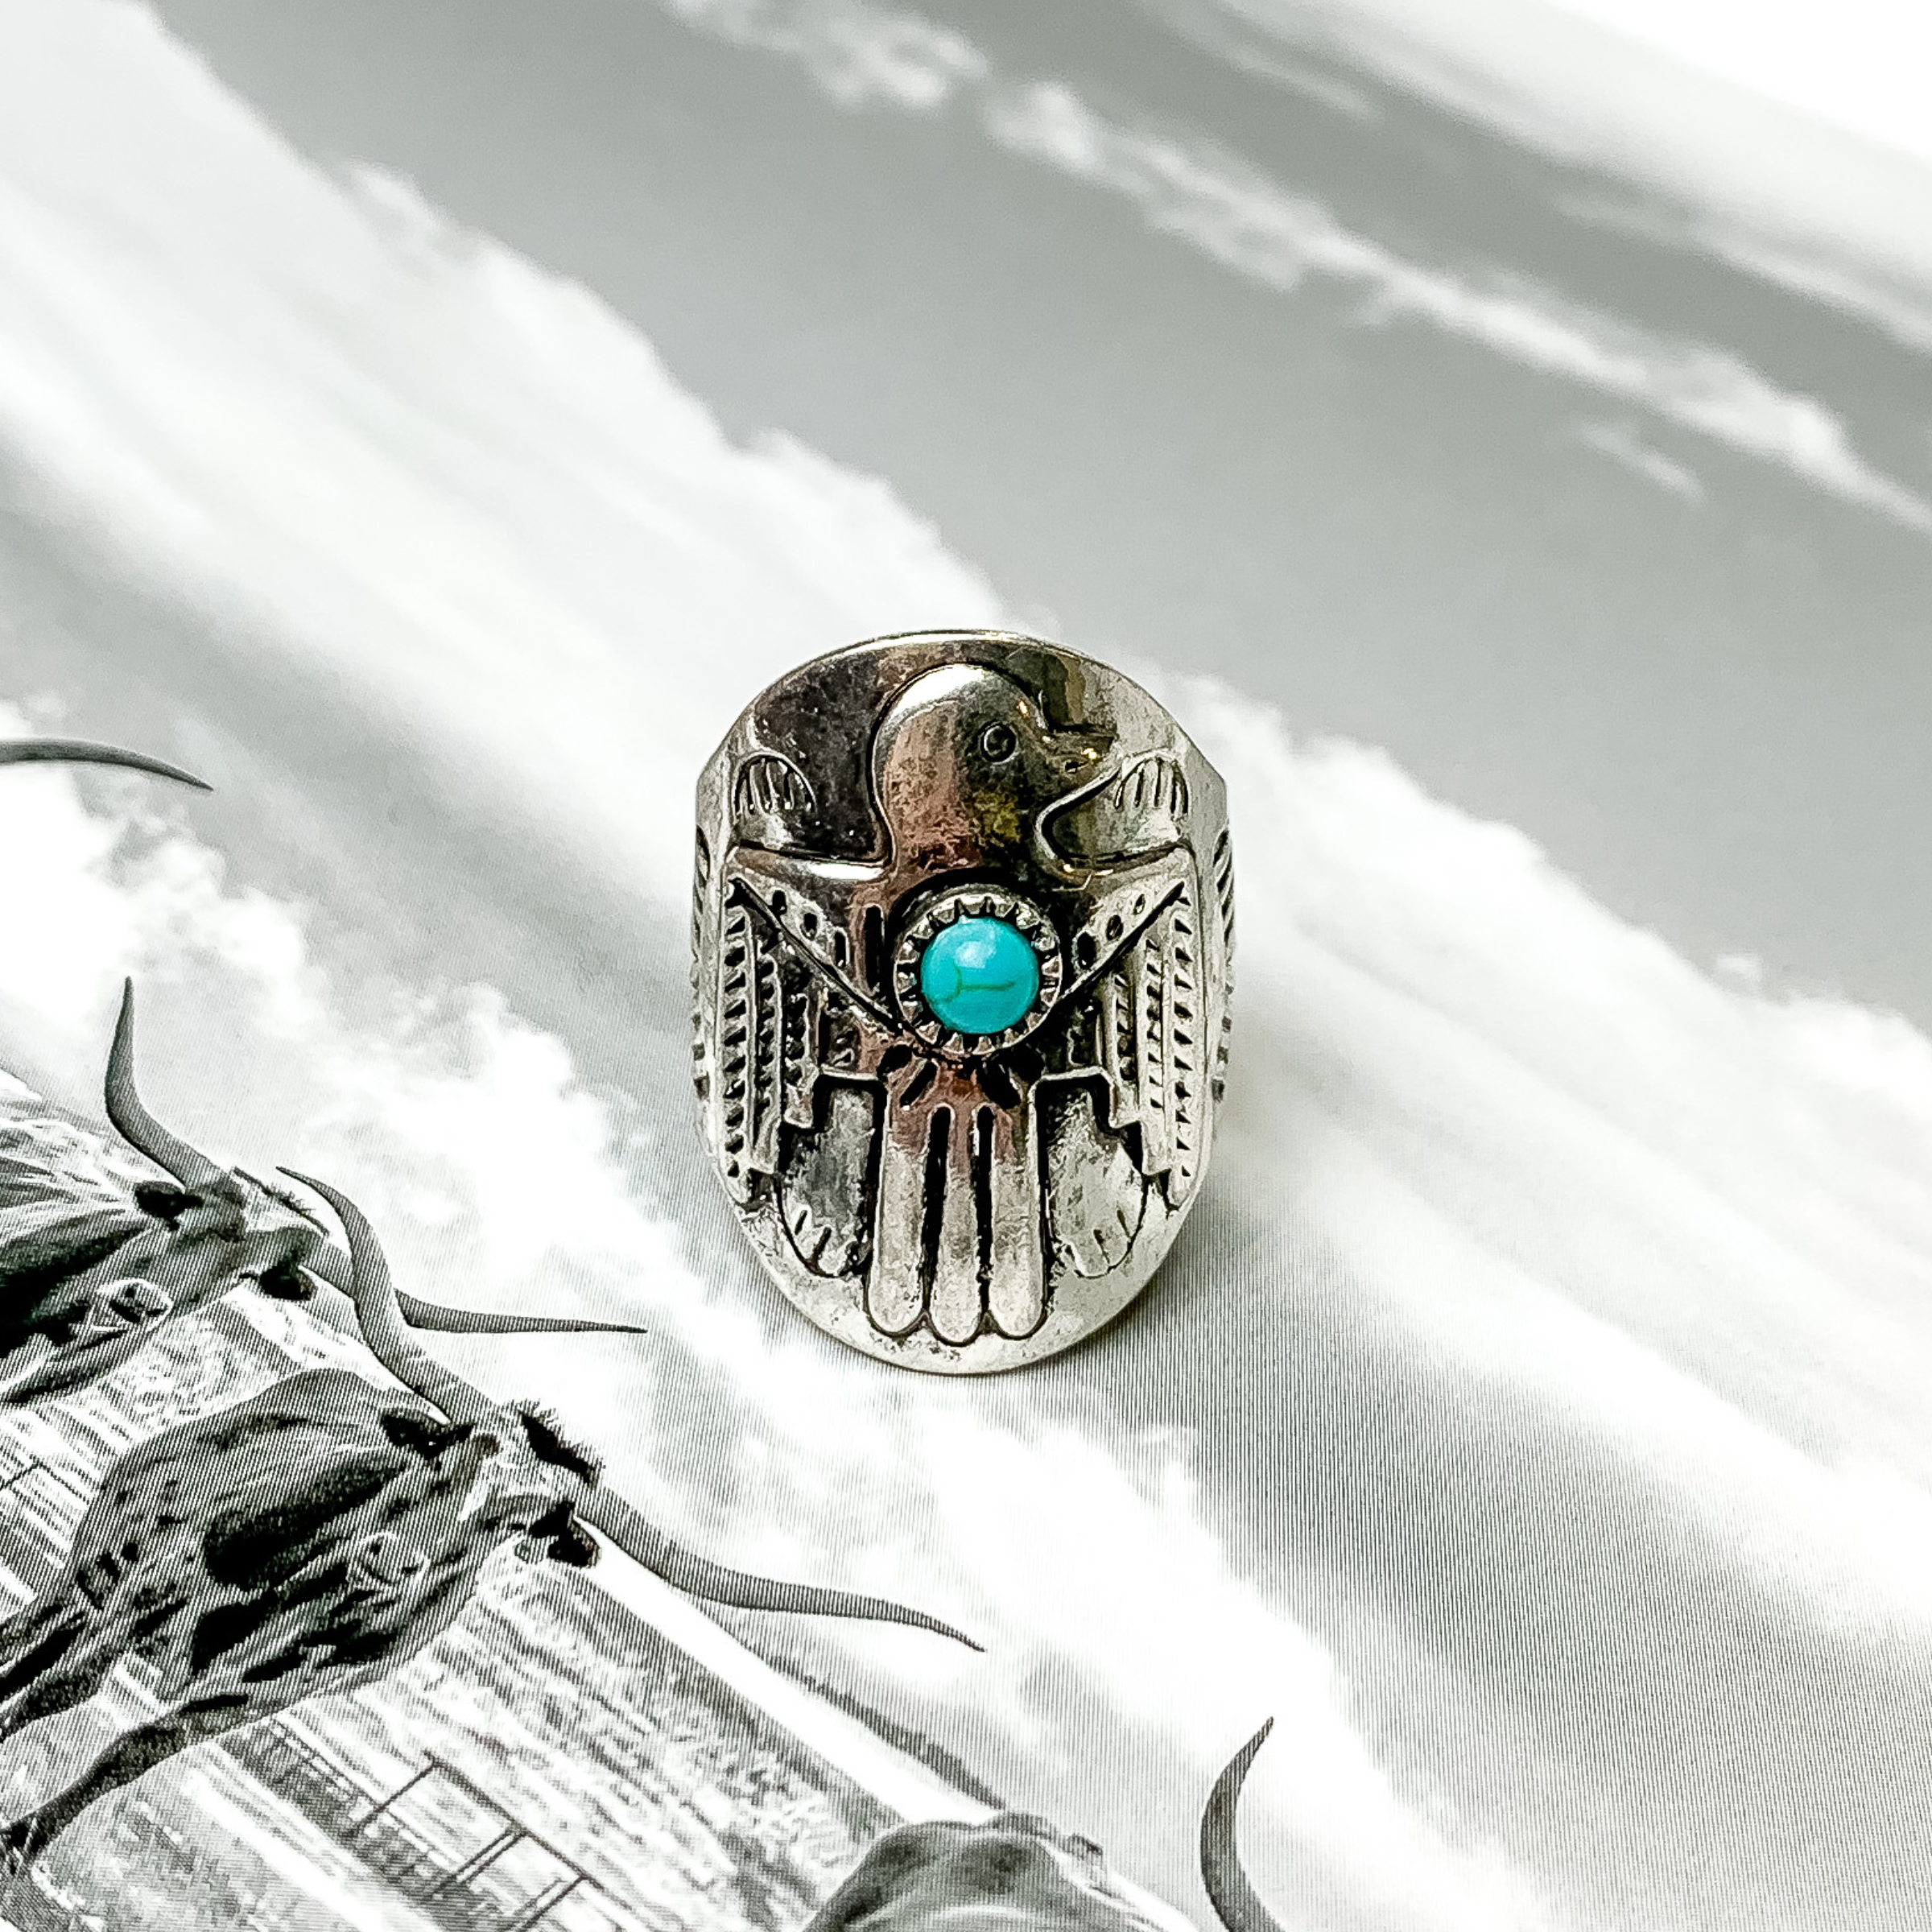 Silver thunderbird ring with small turquoise stone. This ring is pictured on a black and white picture. 